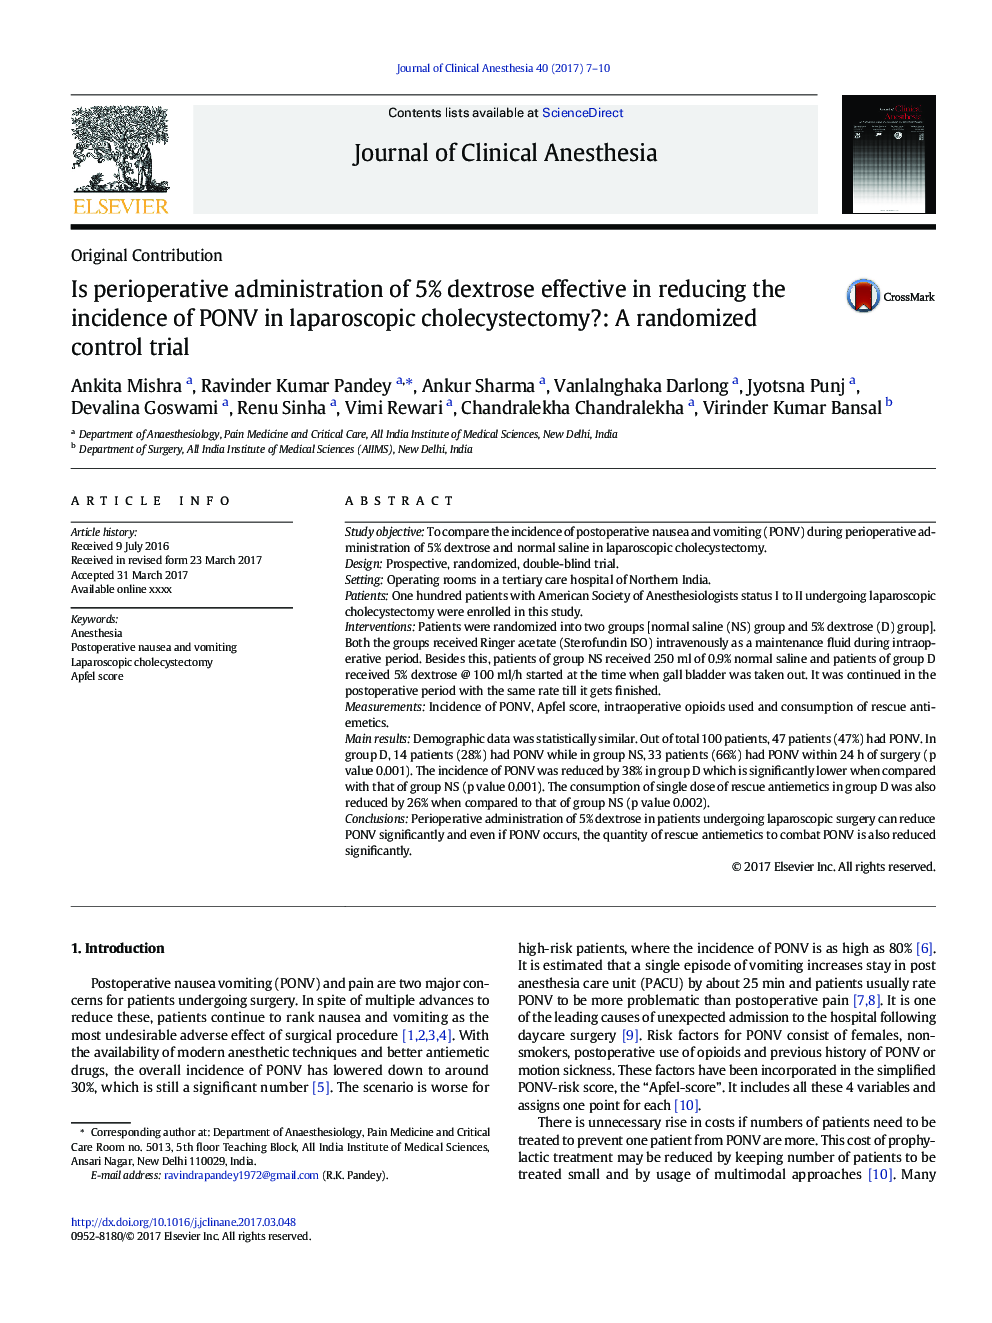 Is perioperative administration of 5% dextrose effective in reducing the incidence of PONV in laparoscopic cholecystectomy?: A randomized control trial